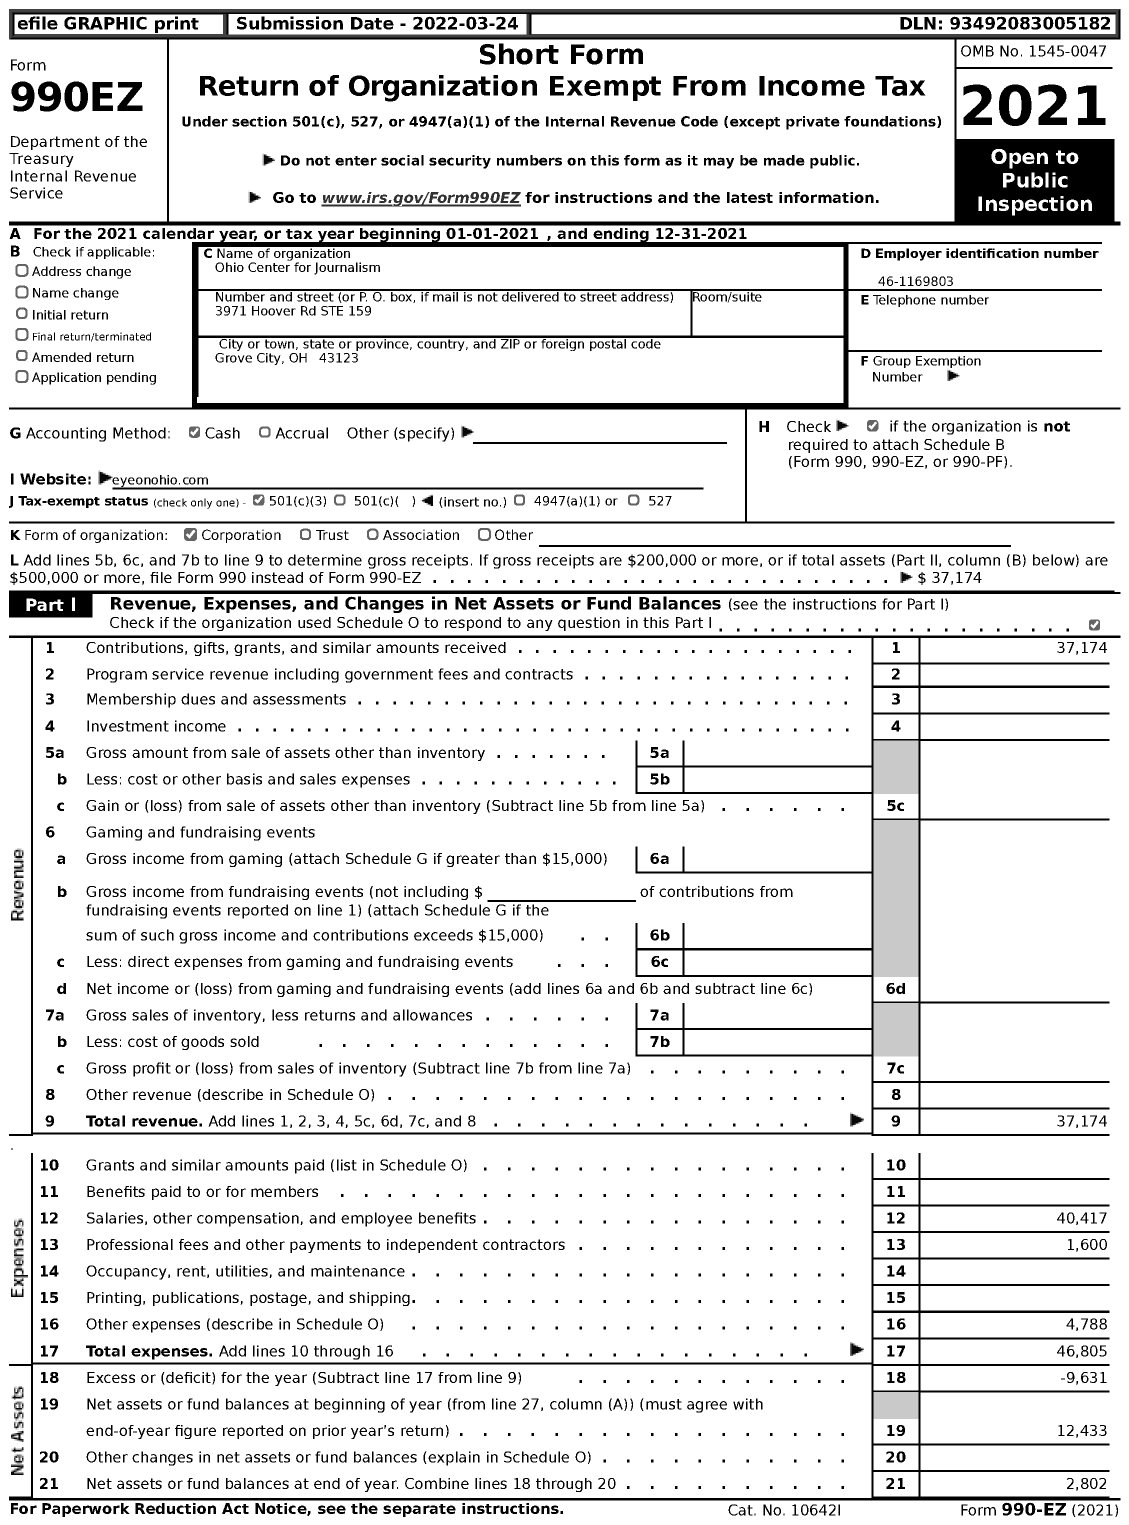 Image of first page of 2021 Form 990EZ for Ohio Center for Journalism